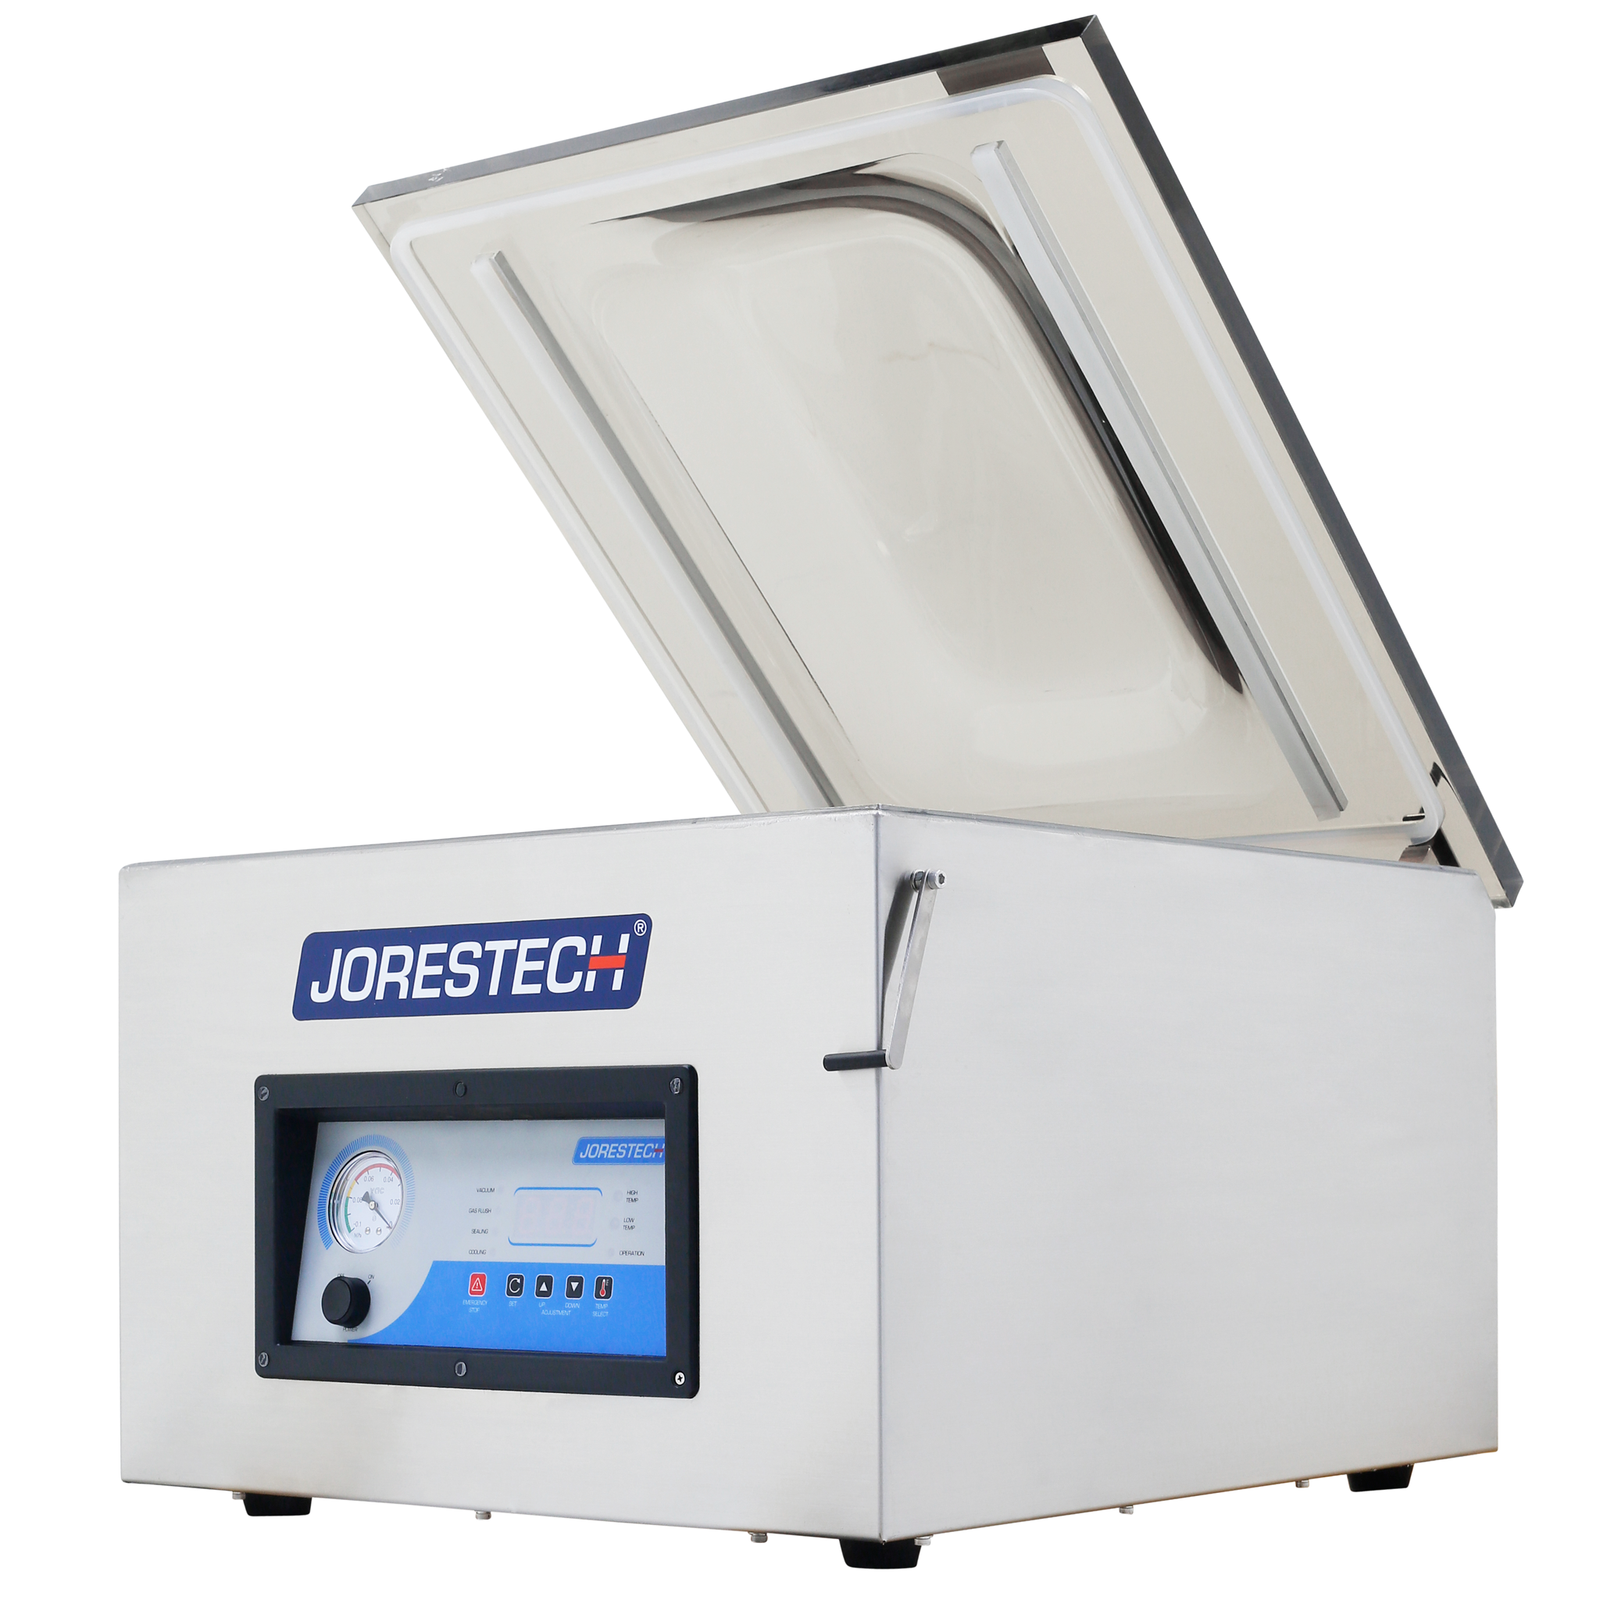 Side of the stainless steel JORES TECHNOLOGIES® tabletop commercial single chamber vacuum sealer with dual seal bar. Vacuum machine has the lid open